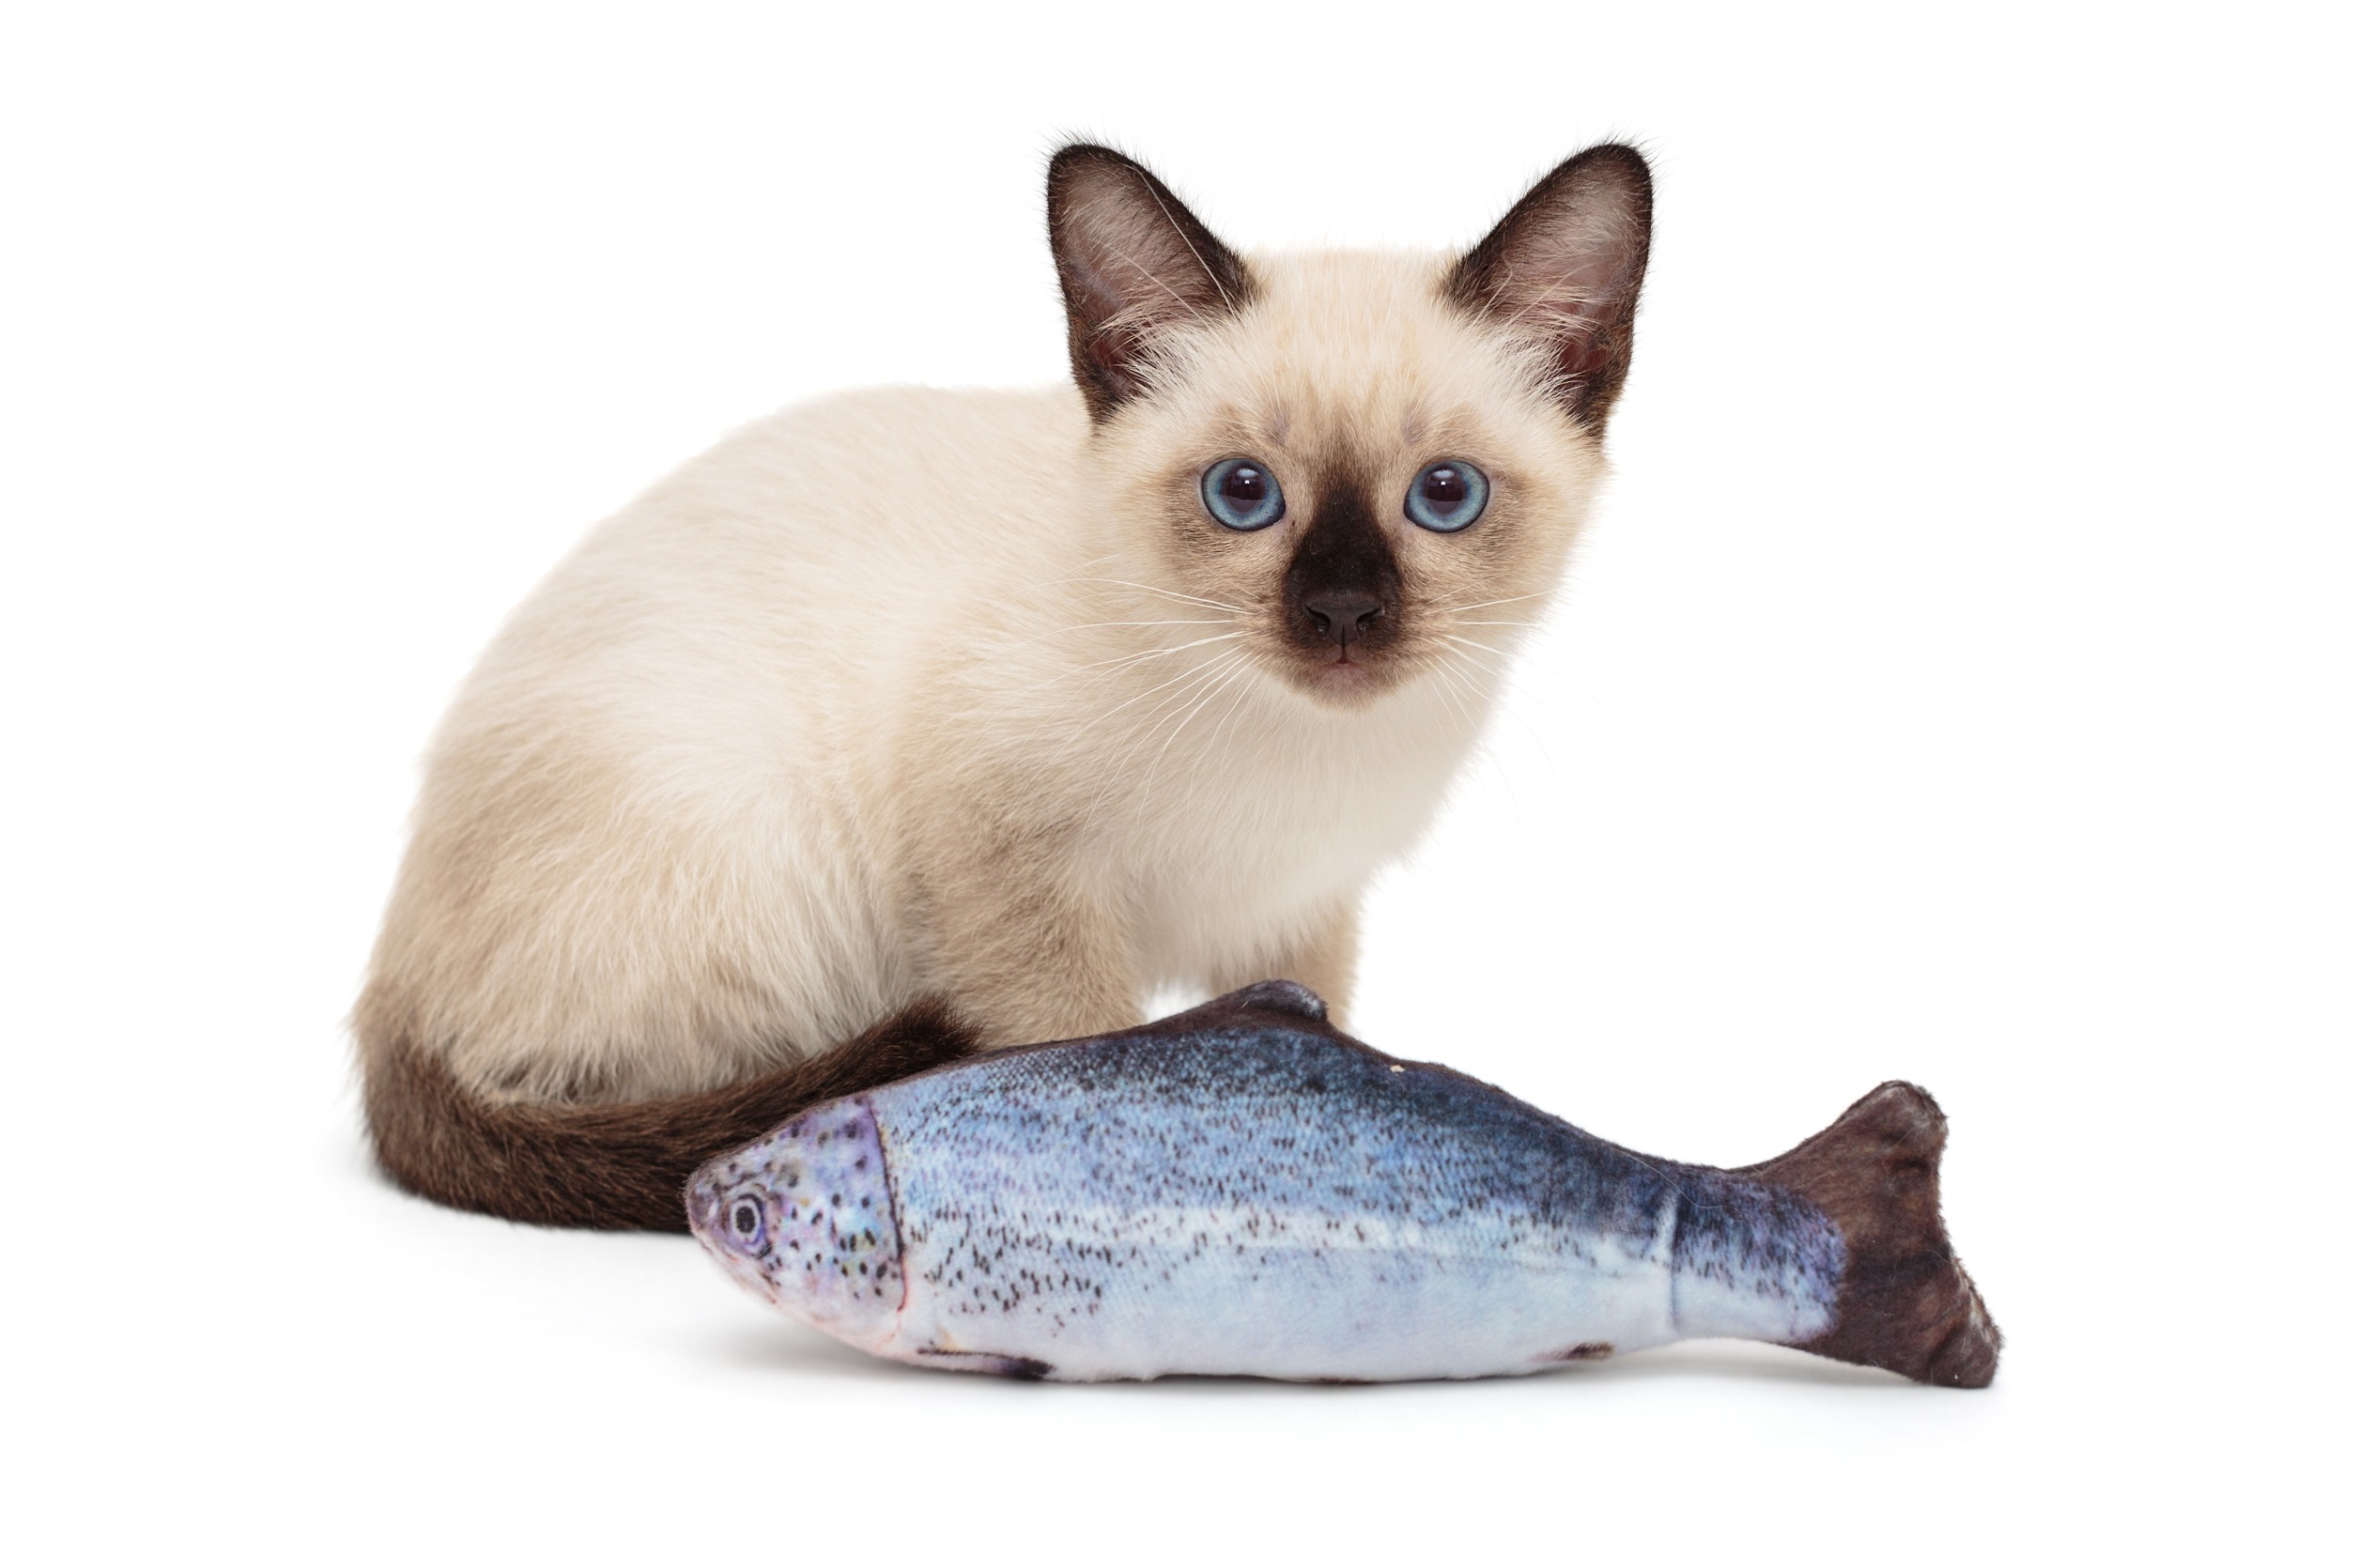 Can Cats Eat Minnows? Vet-Reviewed Health & Safety Guide